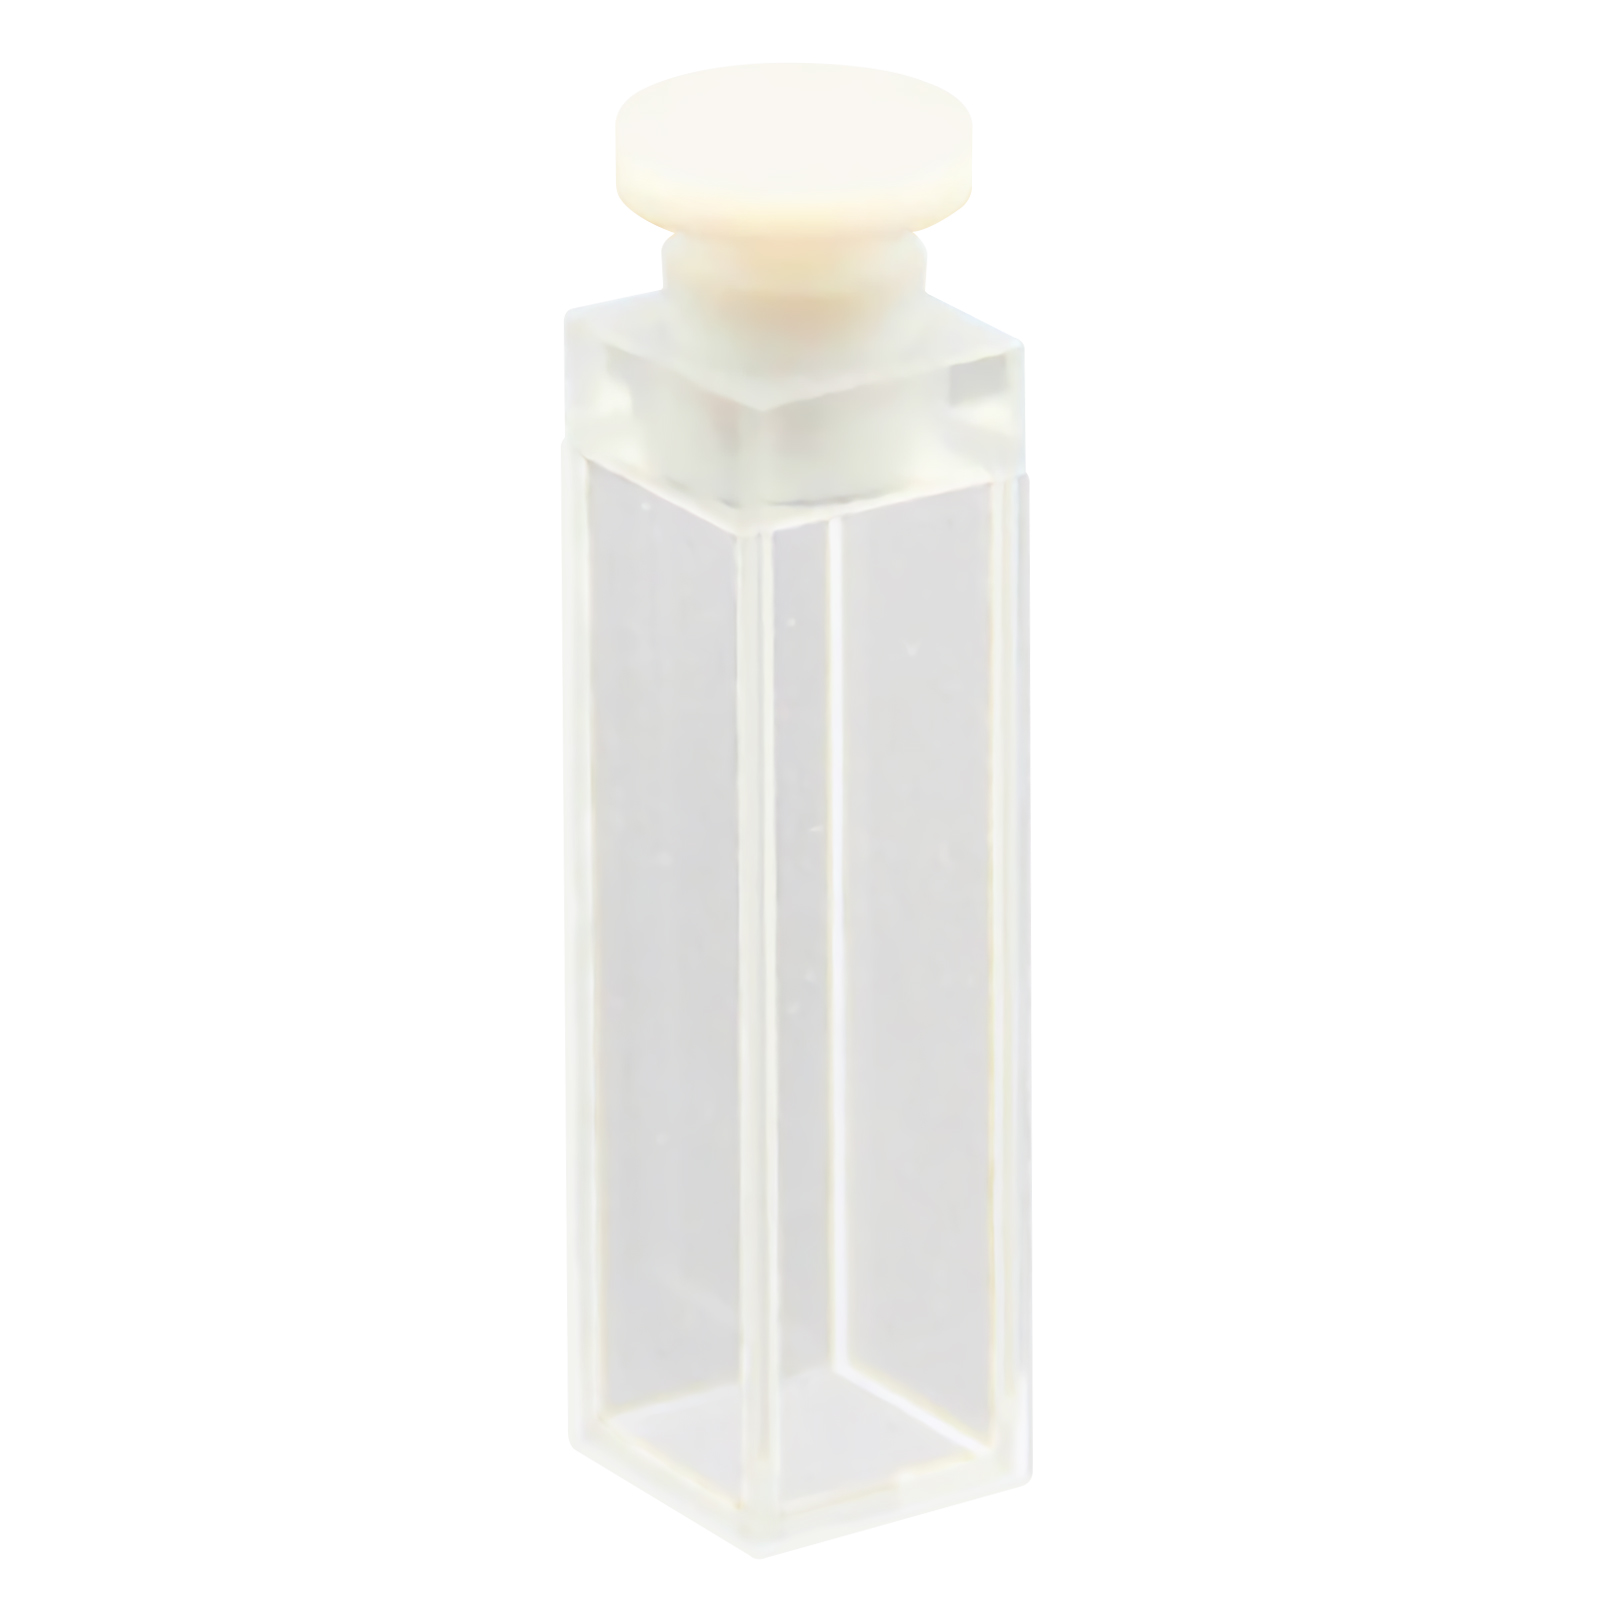 ADAMAS-BETA Quartz Stoppered Fluorescent Four-Way Cuvette Laboratory Glass Cuvette with Cover Absorption Tank Sample Pool Optical Path 5-100mm